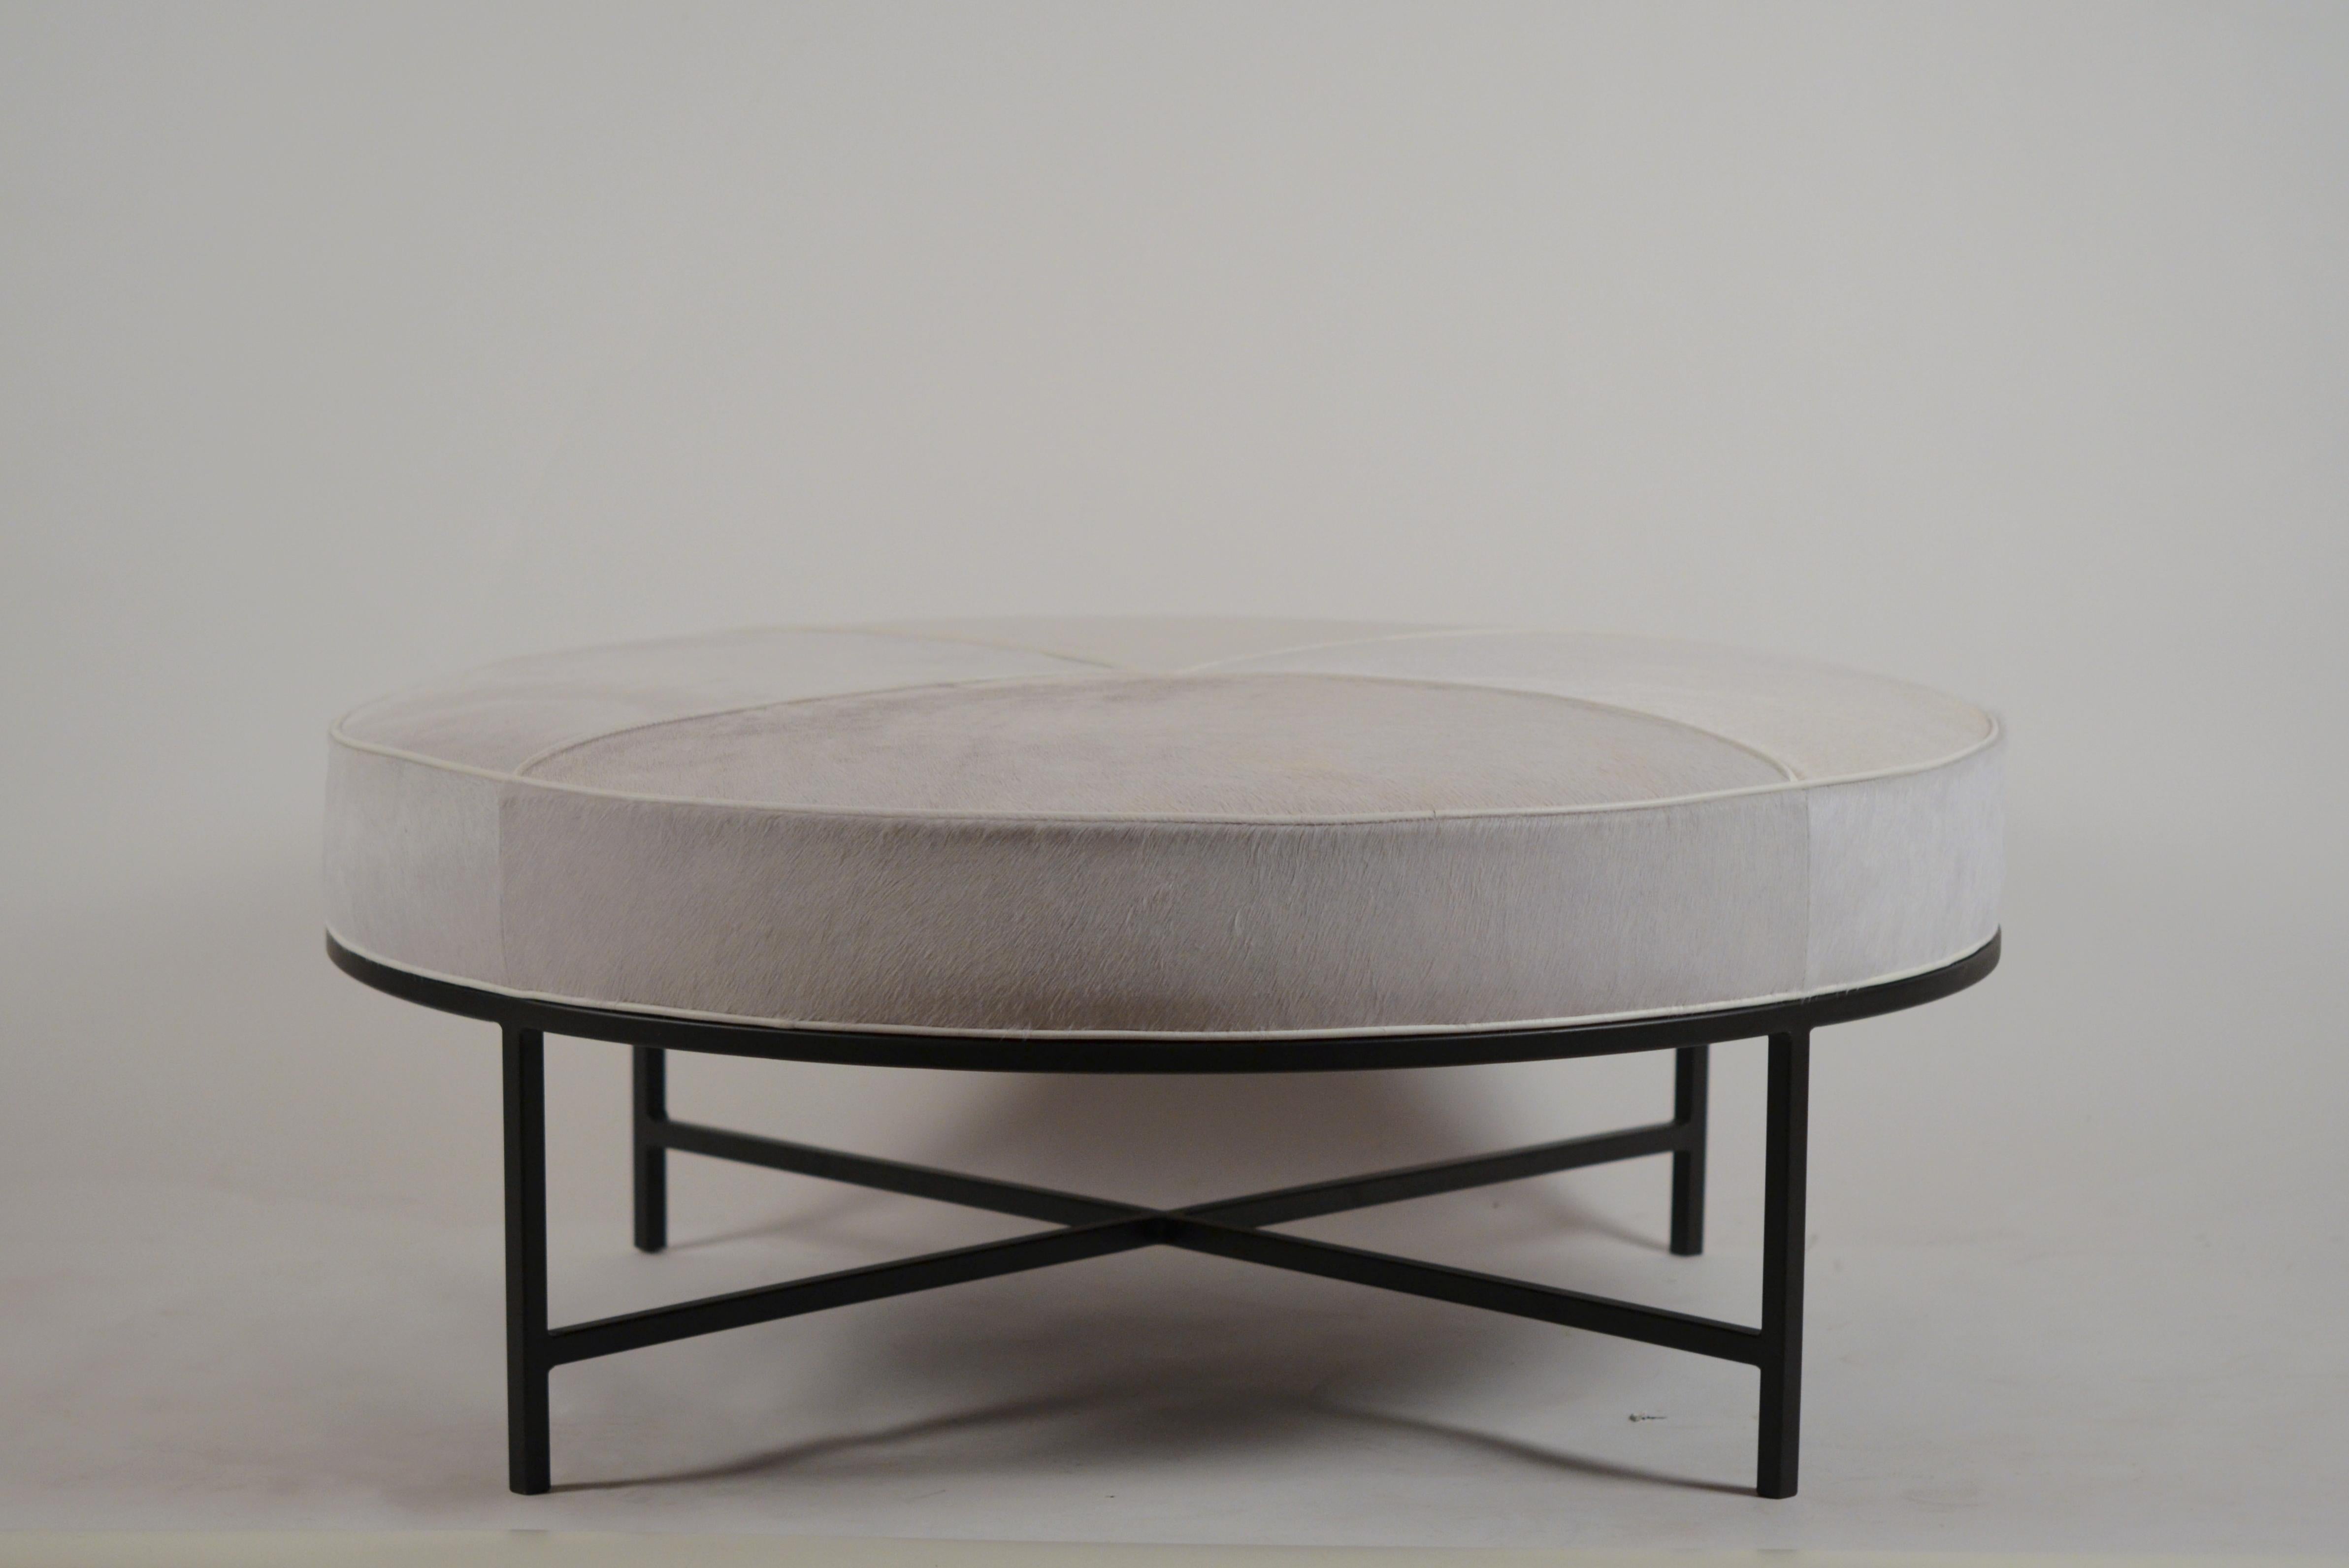 White hide and matte black 'Tambour' round ottoman by Design Frères. Upholstered firm for use as an ottoman / coffee table. Great for dens / media rooms, with books, tray... or feet!.